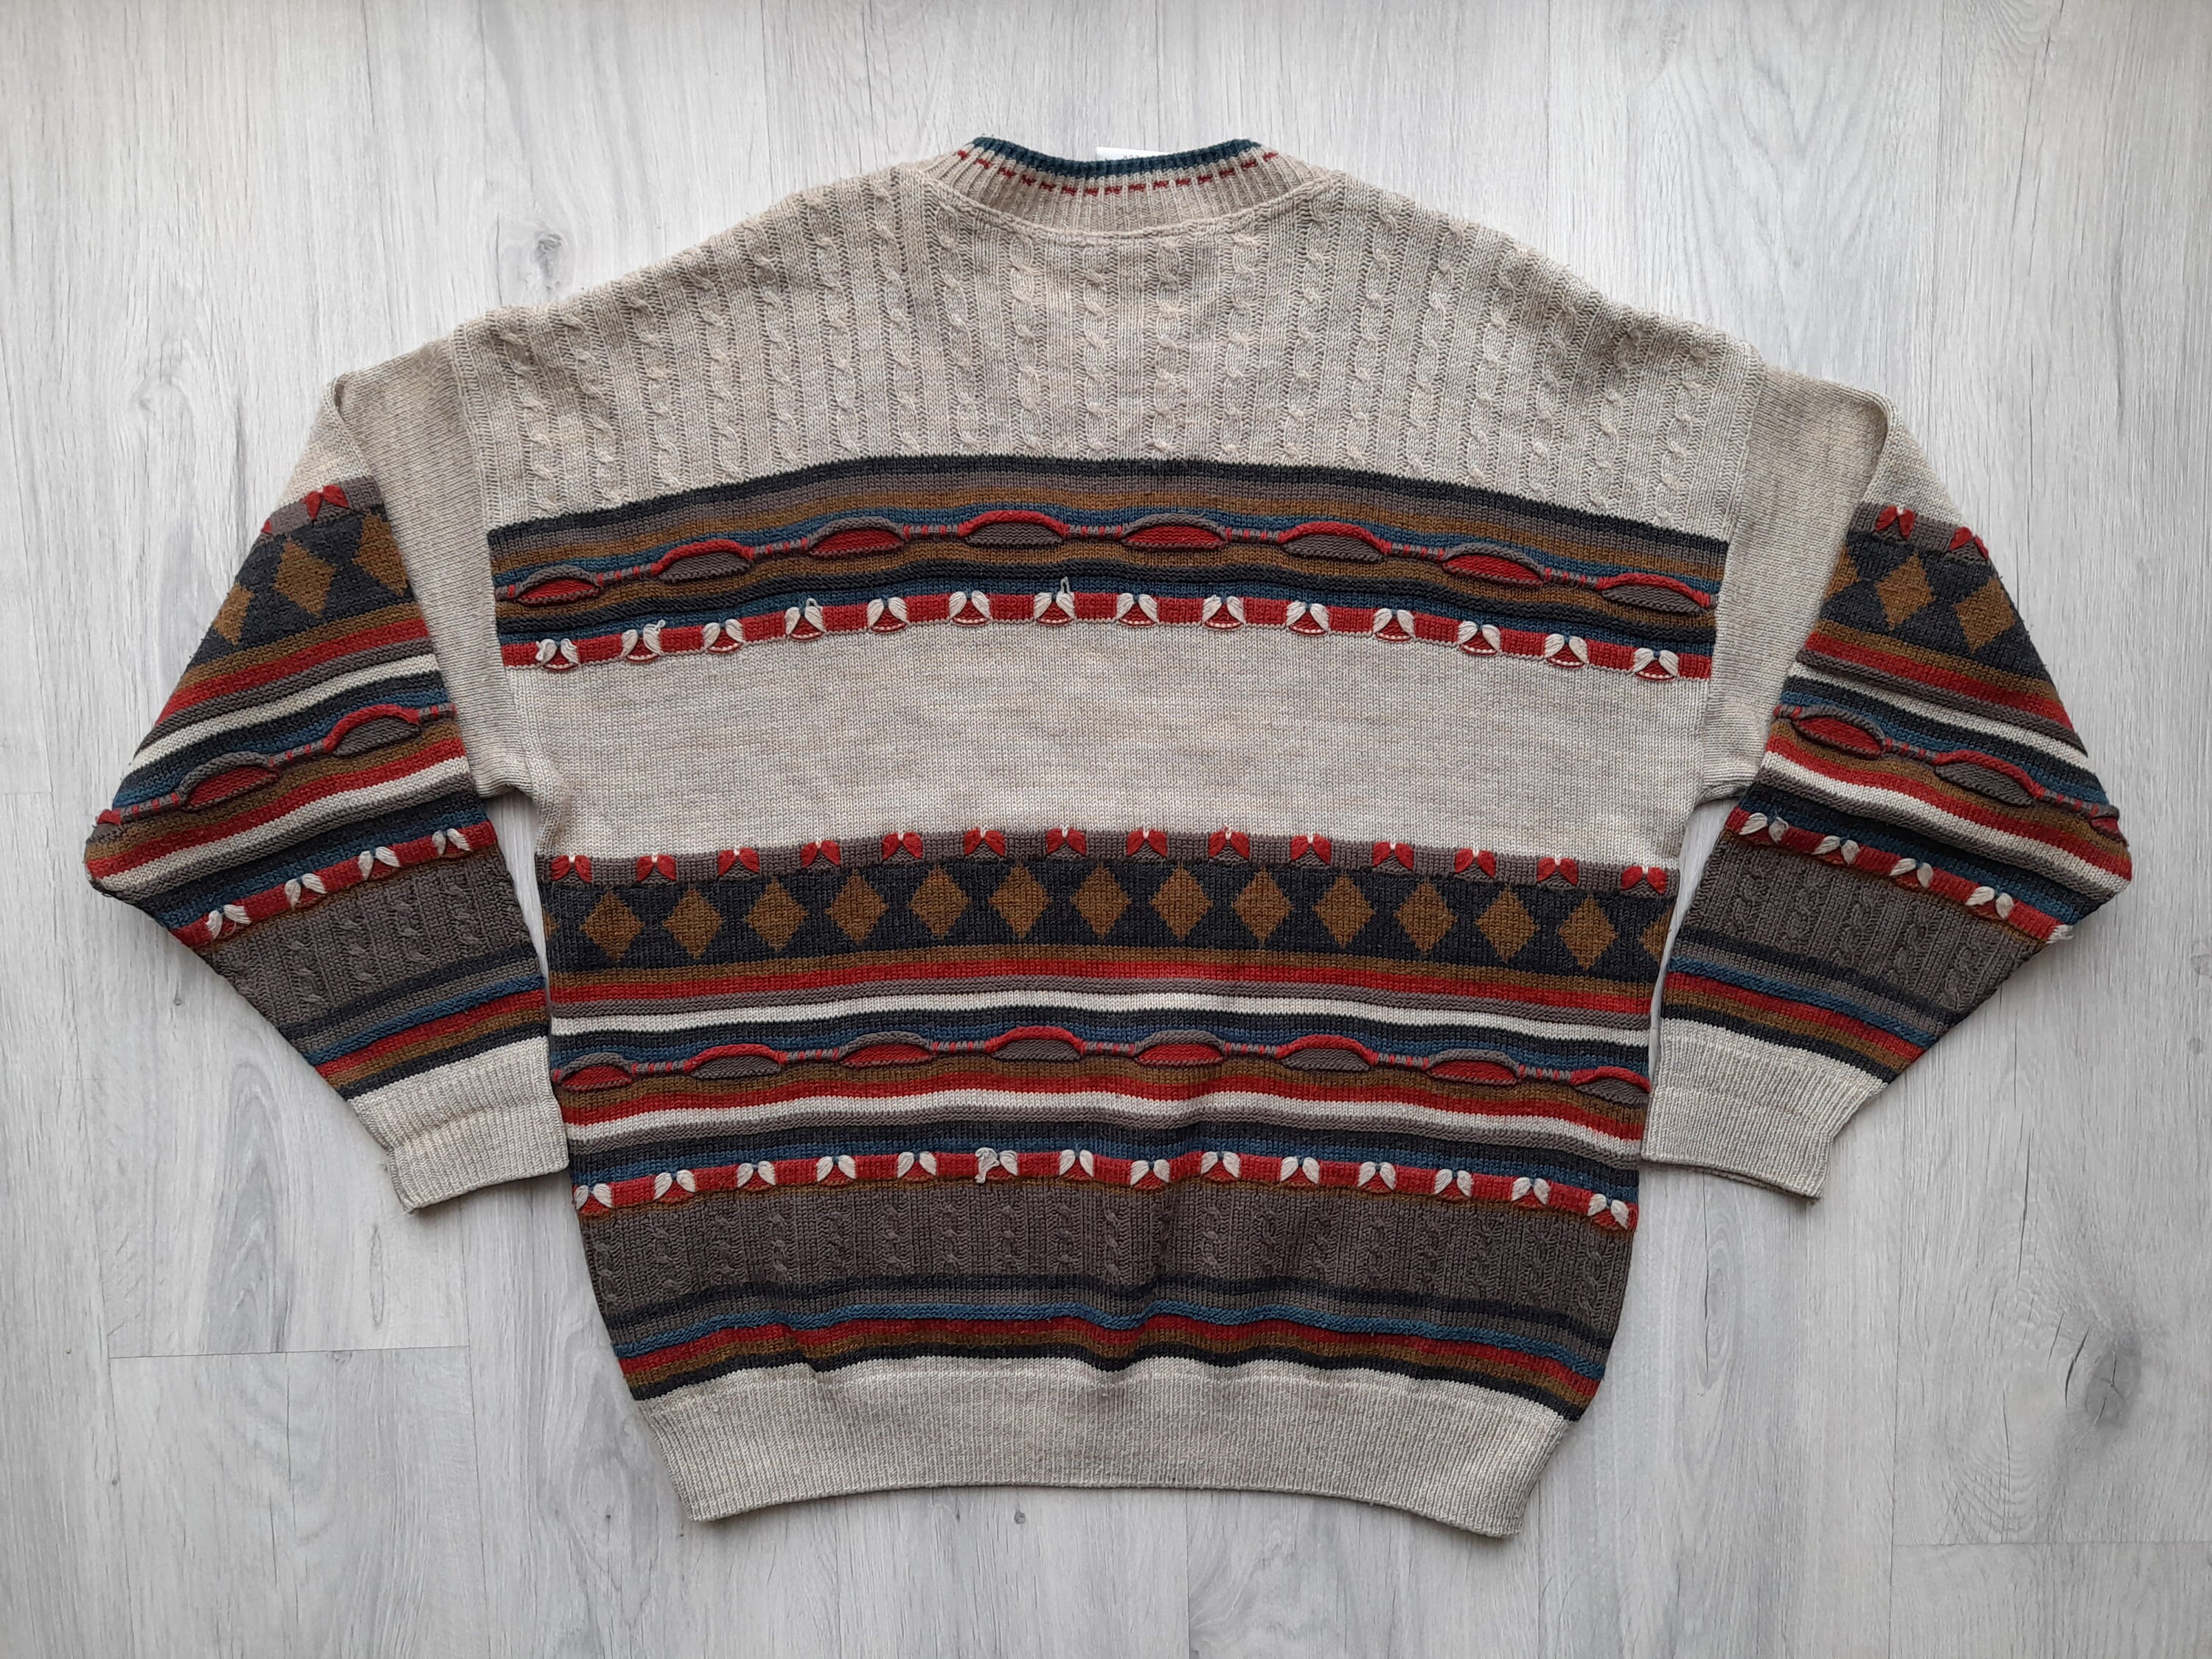 Vintage 90s the Sweater Shop ,made in the UK, Colourful Sweater